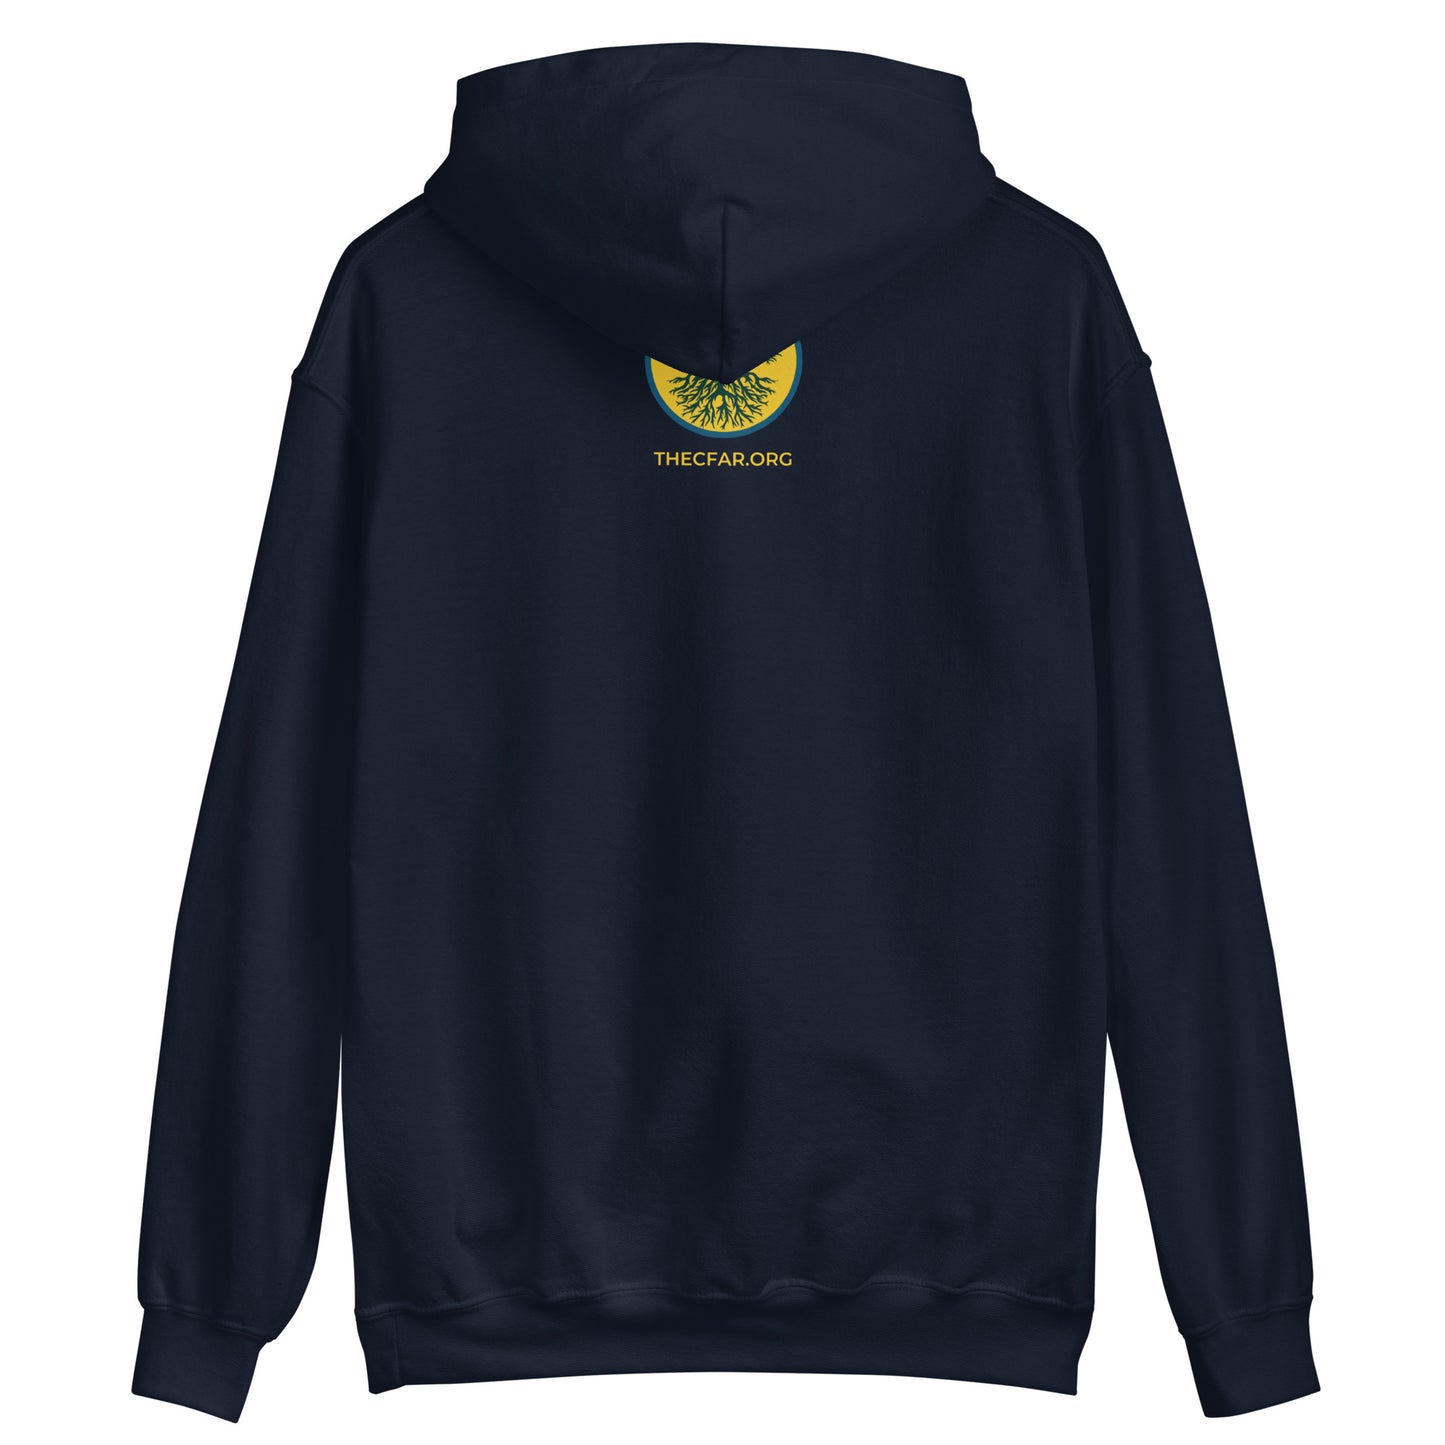 Rooted in Regeneration - Roots Hoodie